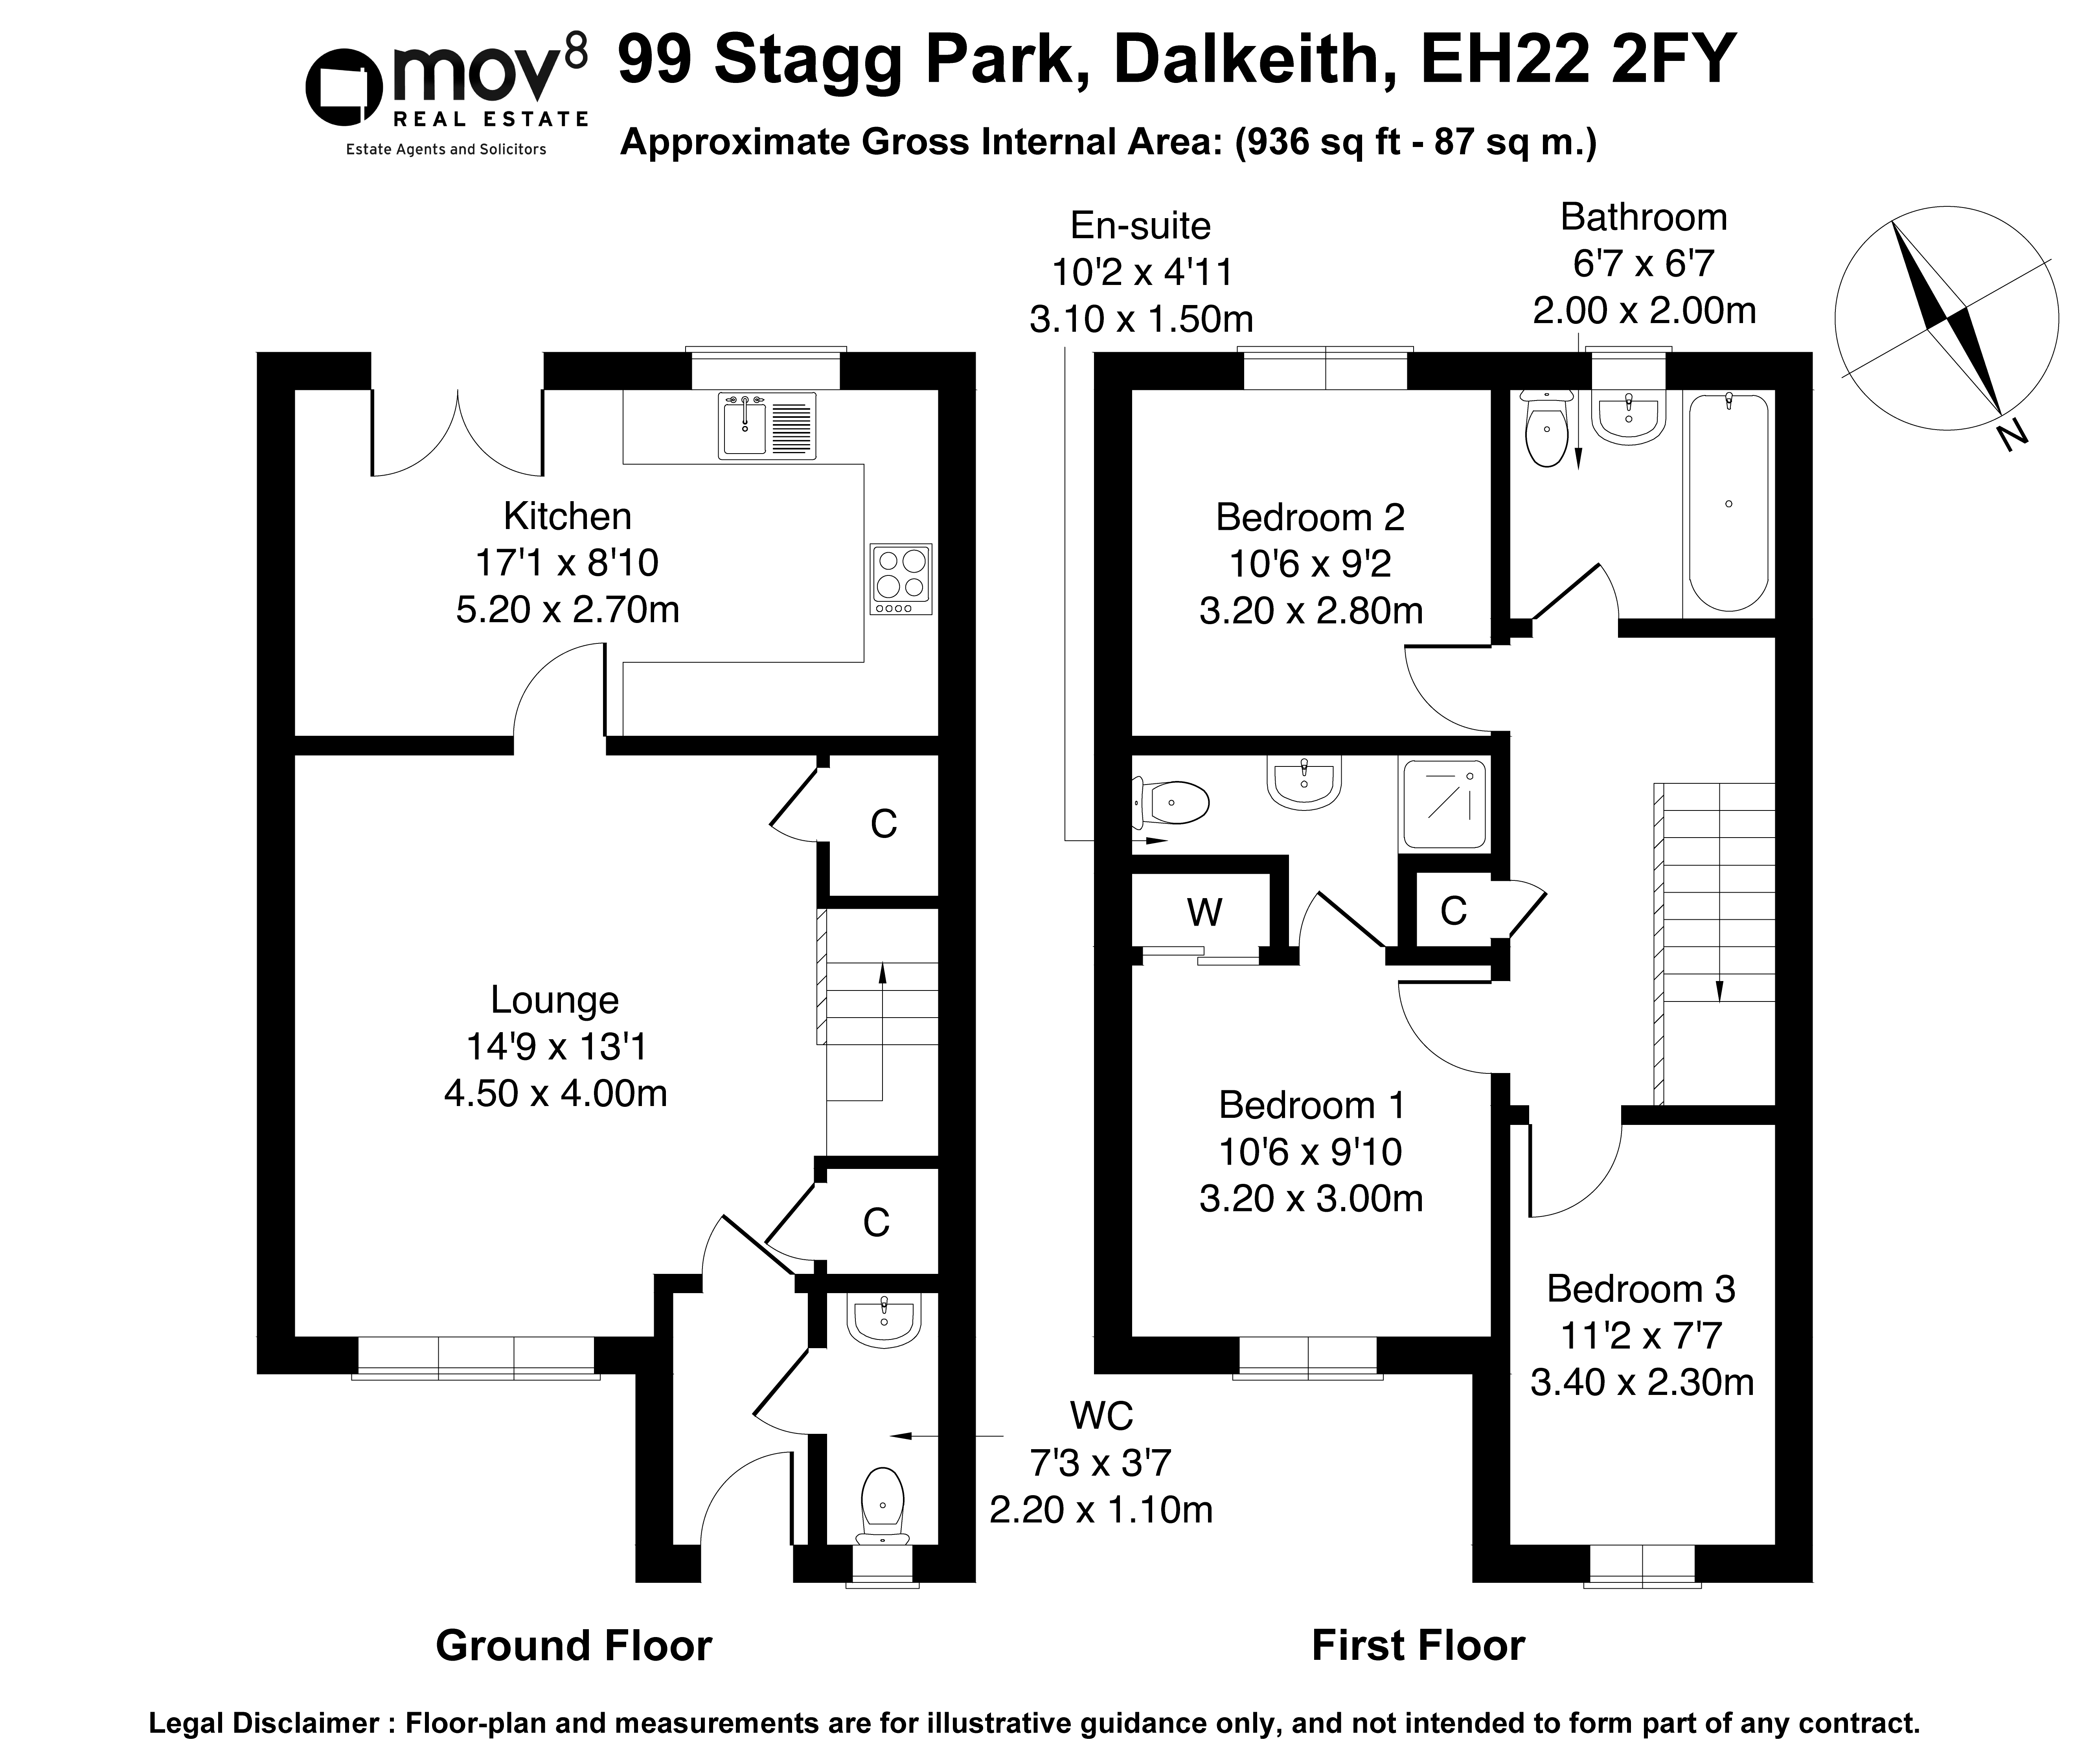 Floorplan 1 of 99 Stagg Park, Dalkeith, EH22 2FY